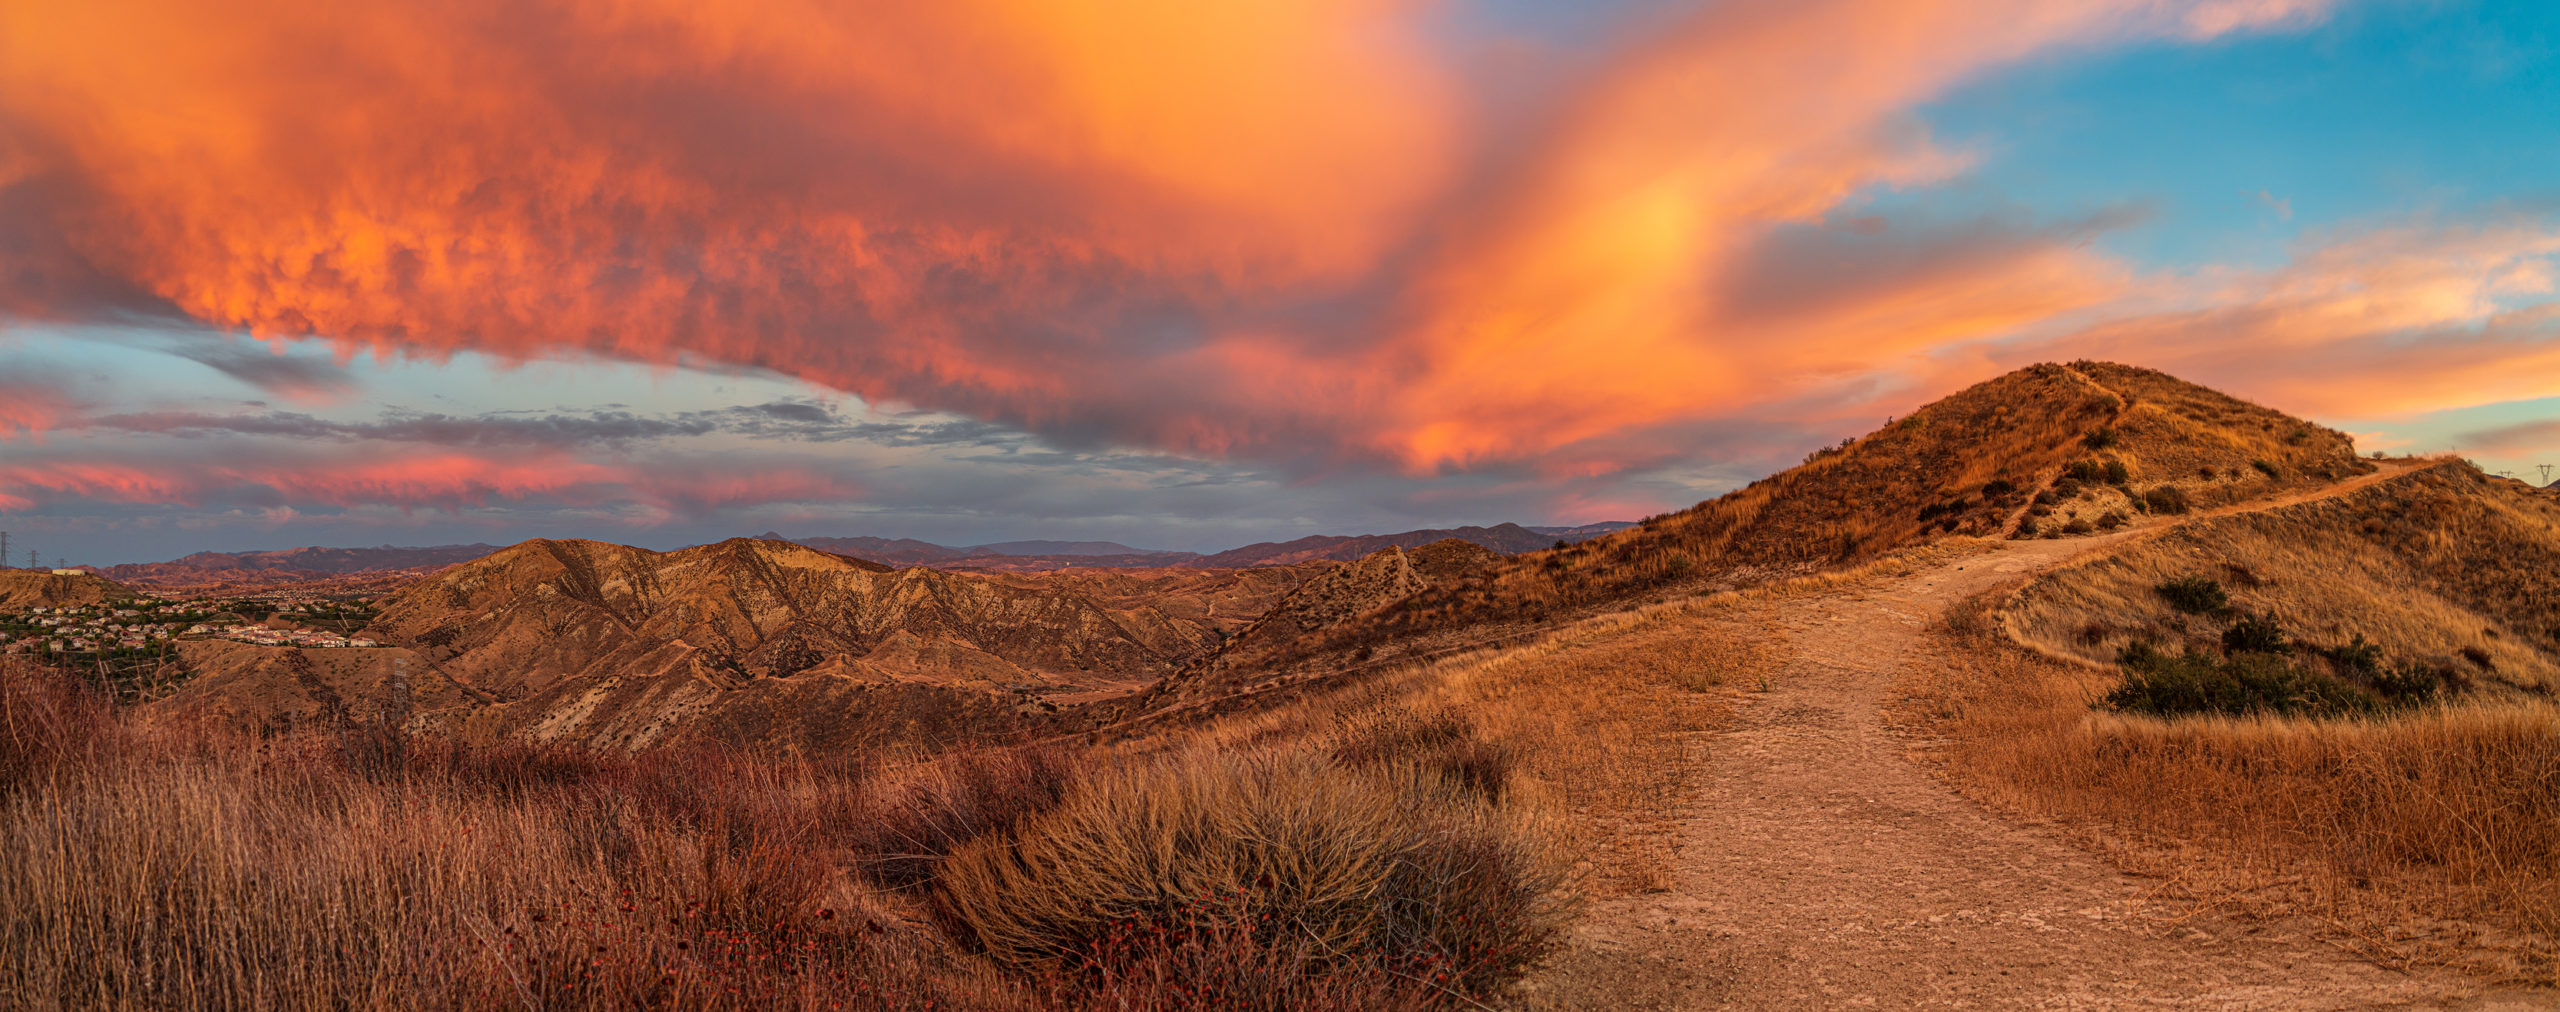 Sky Fire in the Haskell Canyon Open Space